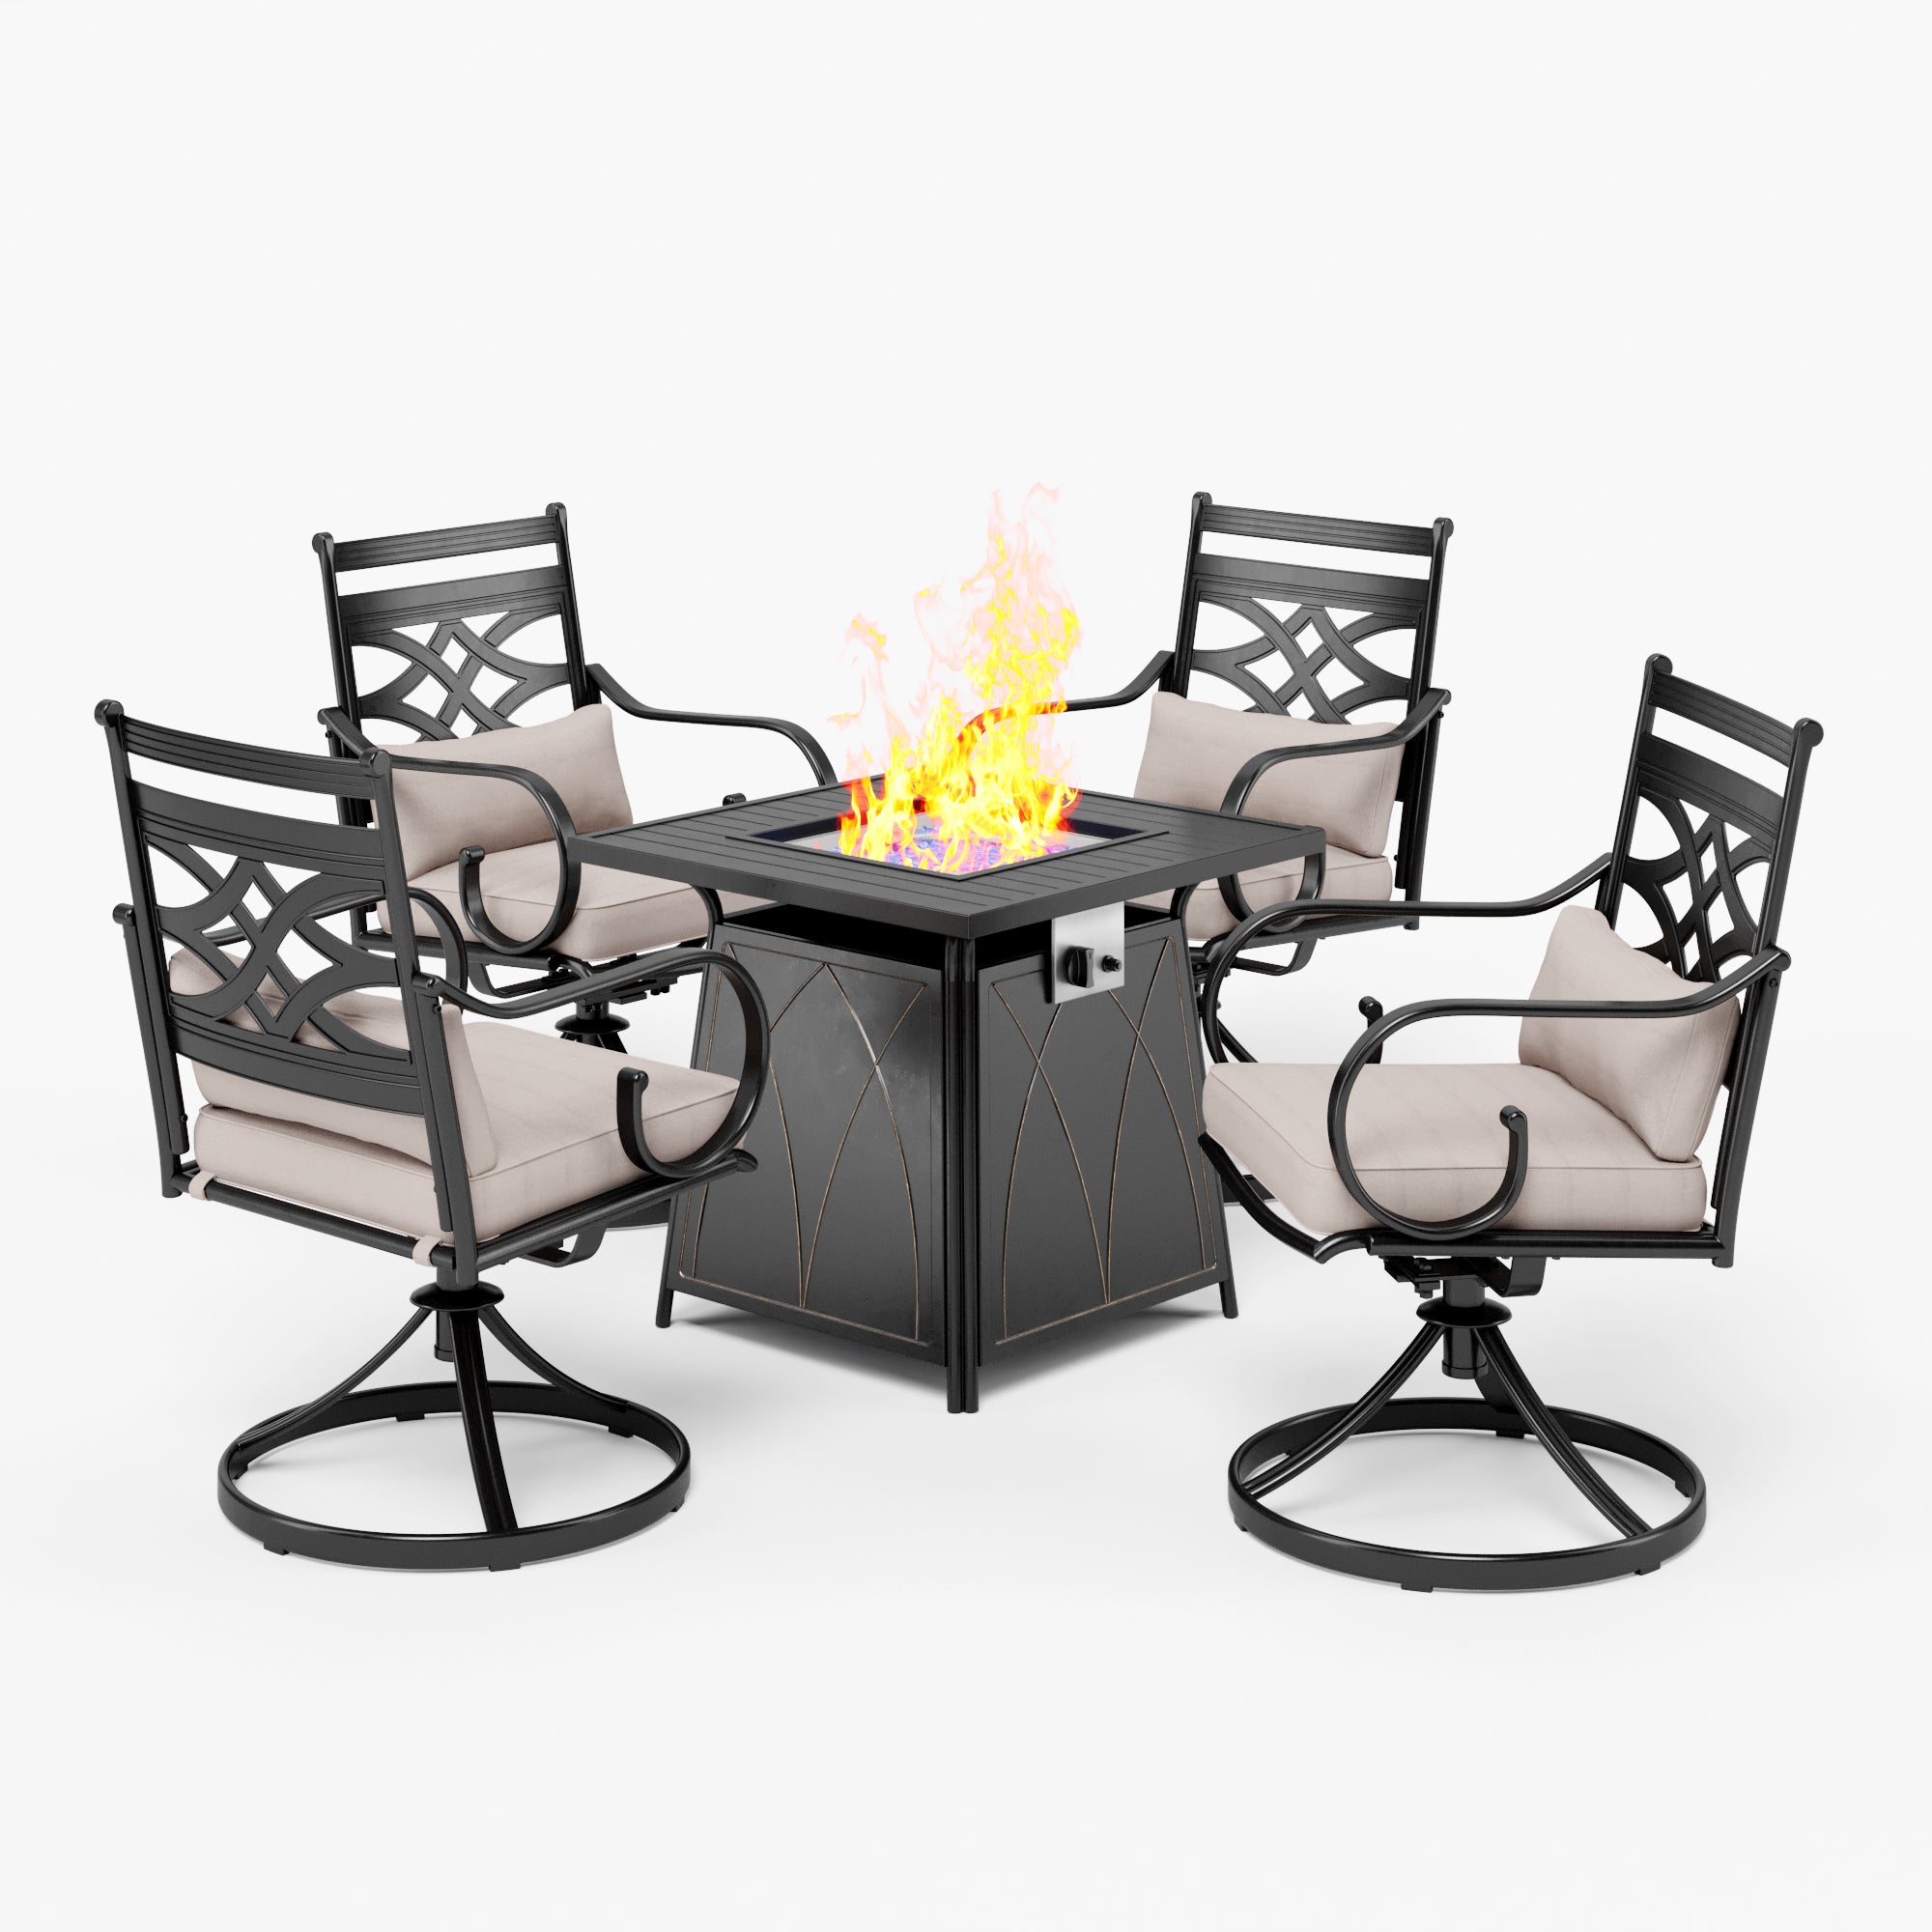 MFSTUDIO 5-Piece Outdoor Dining Set Gas Fire Pit Table & Elegant Cast Iron Pattern Dining Chairs